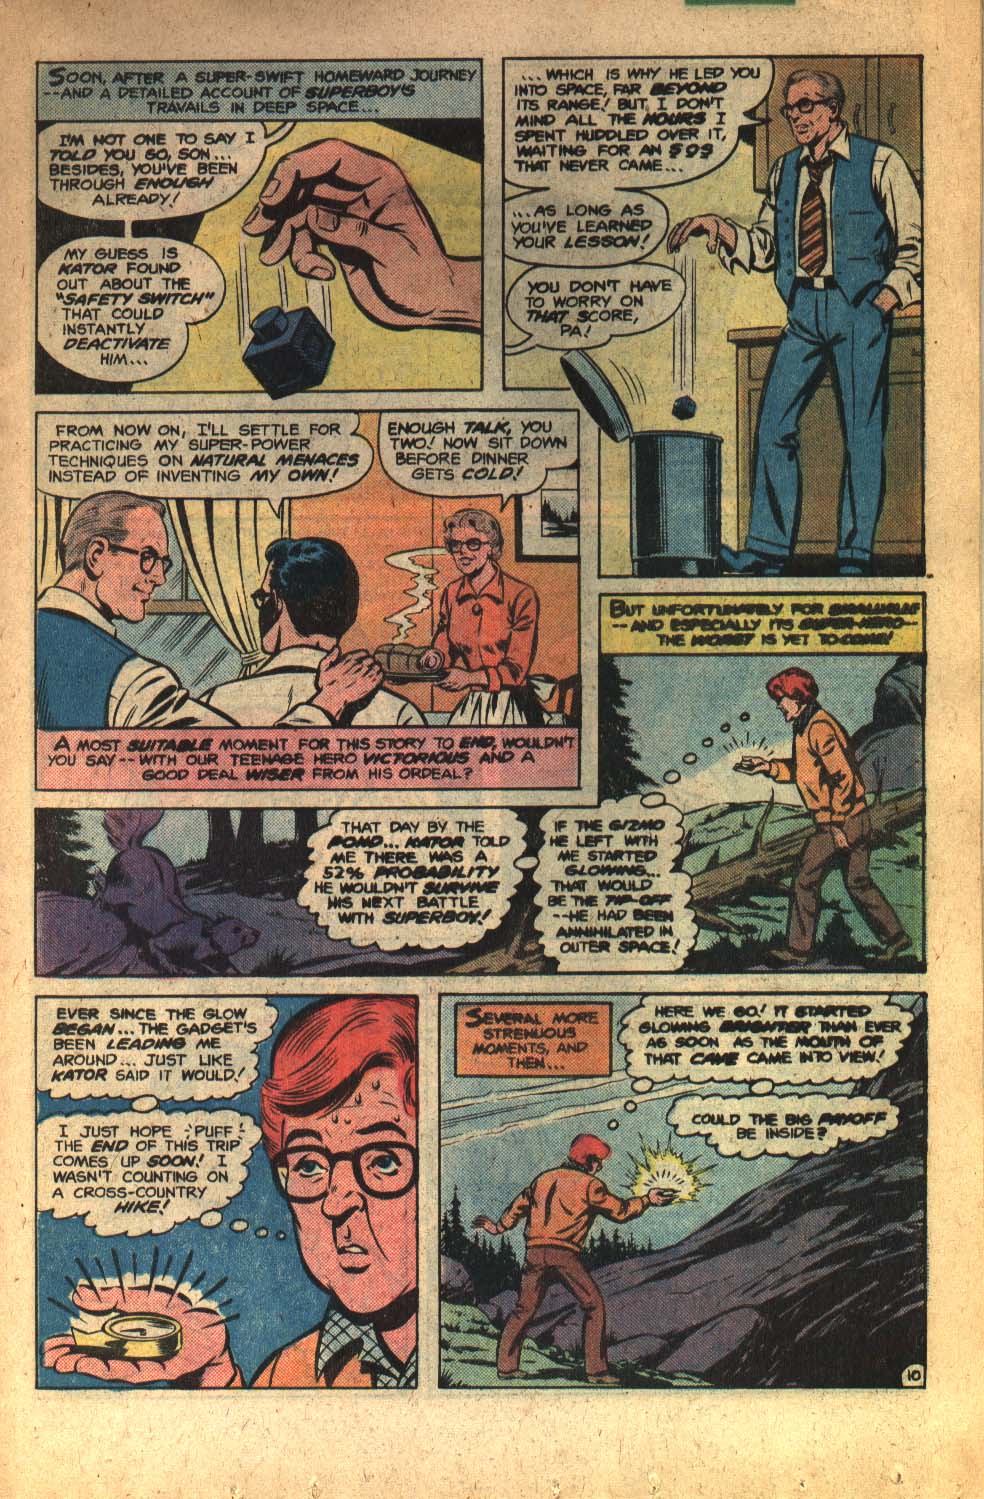 The New Adventures of Superboy 18 Page 14